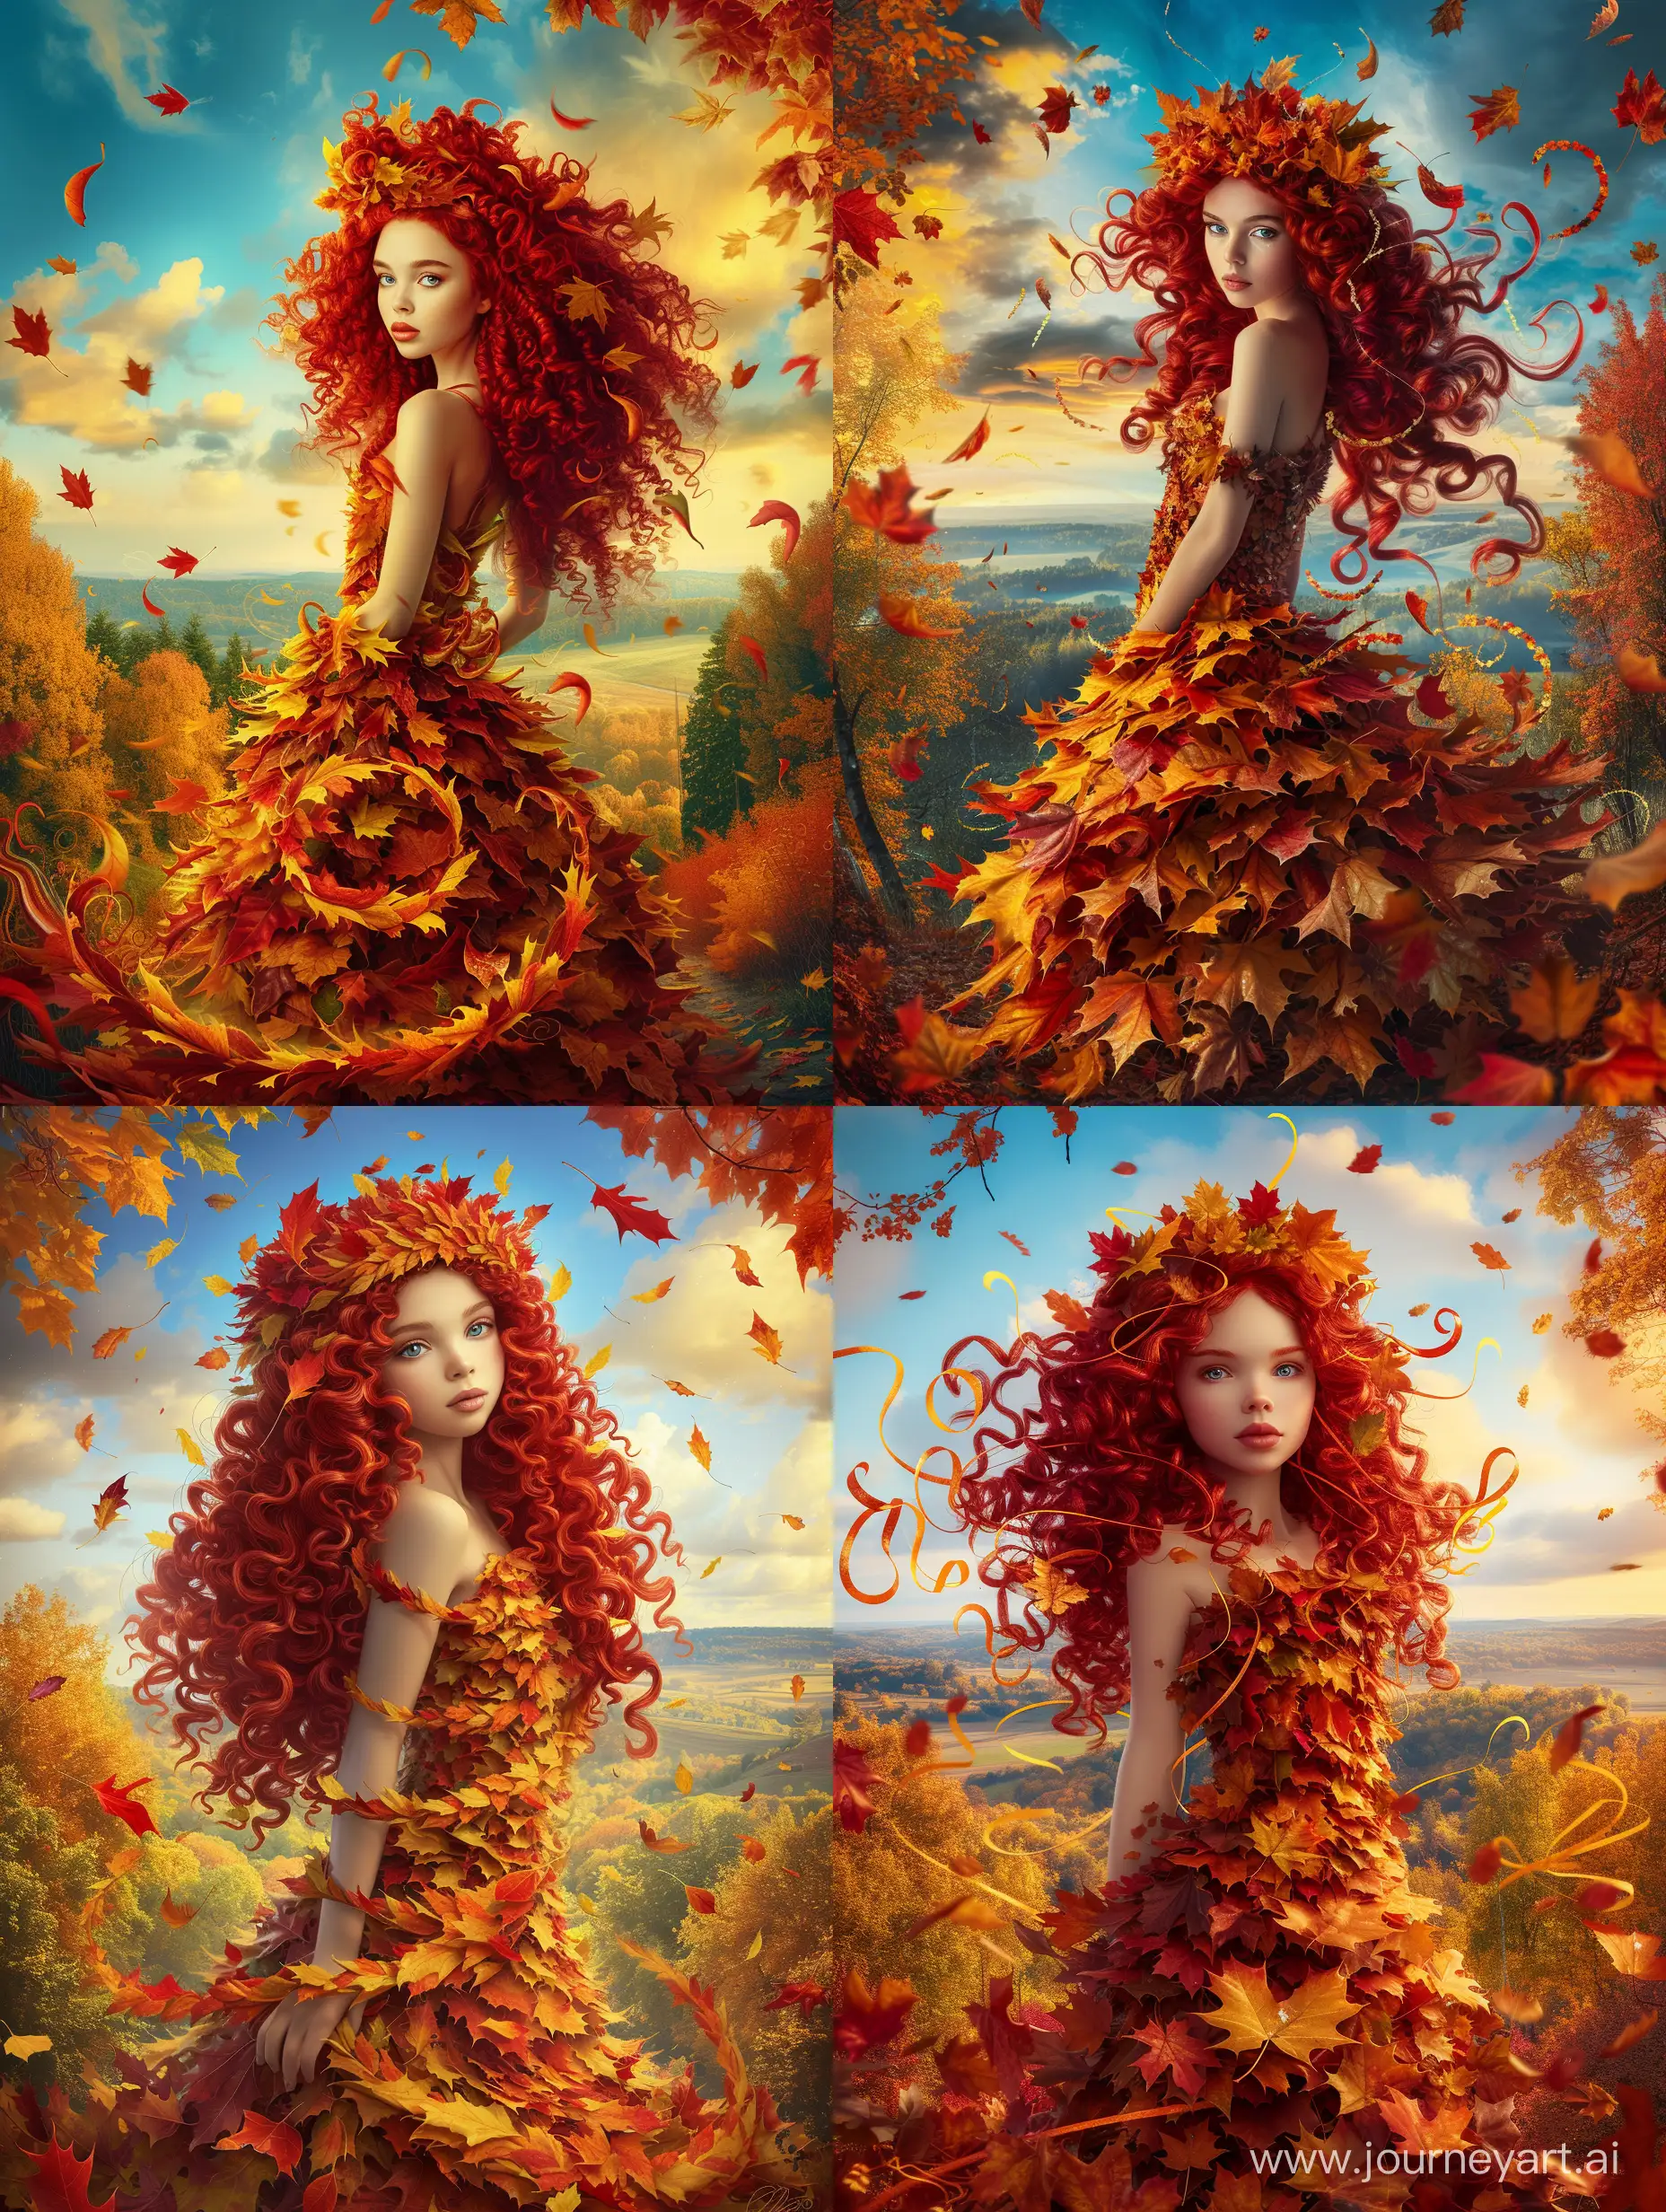 Enchanting-Autumn-Queen-with-Red-Curly-Hair-in-a-Forest-Landscape